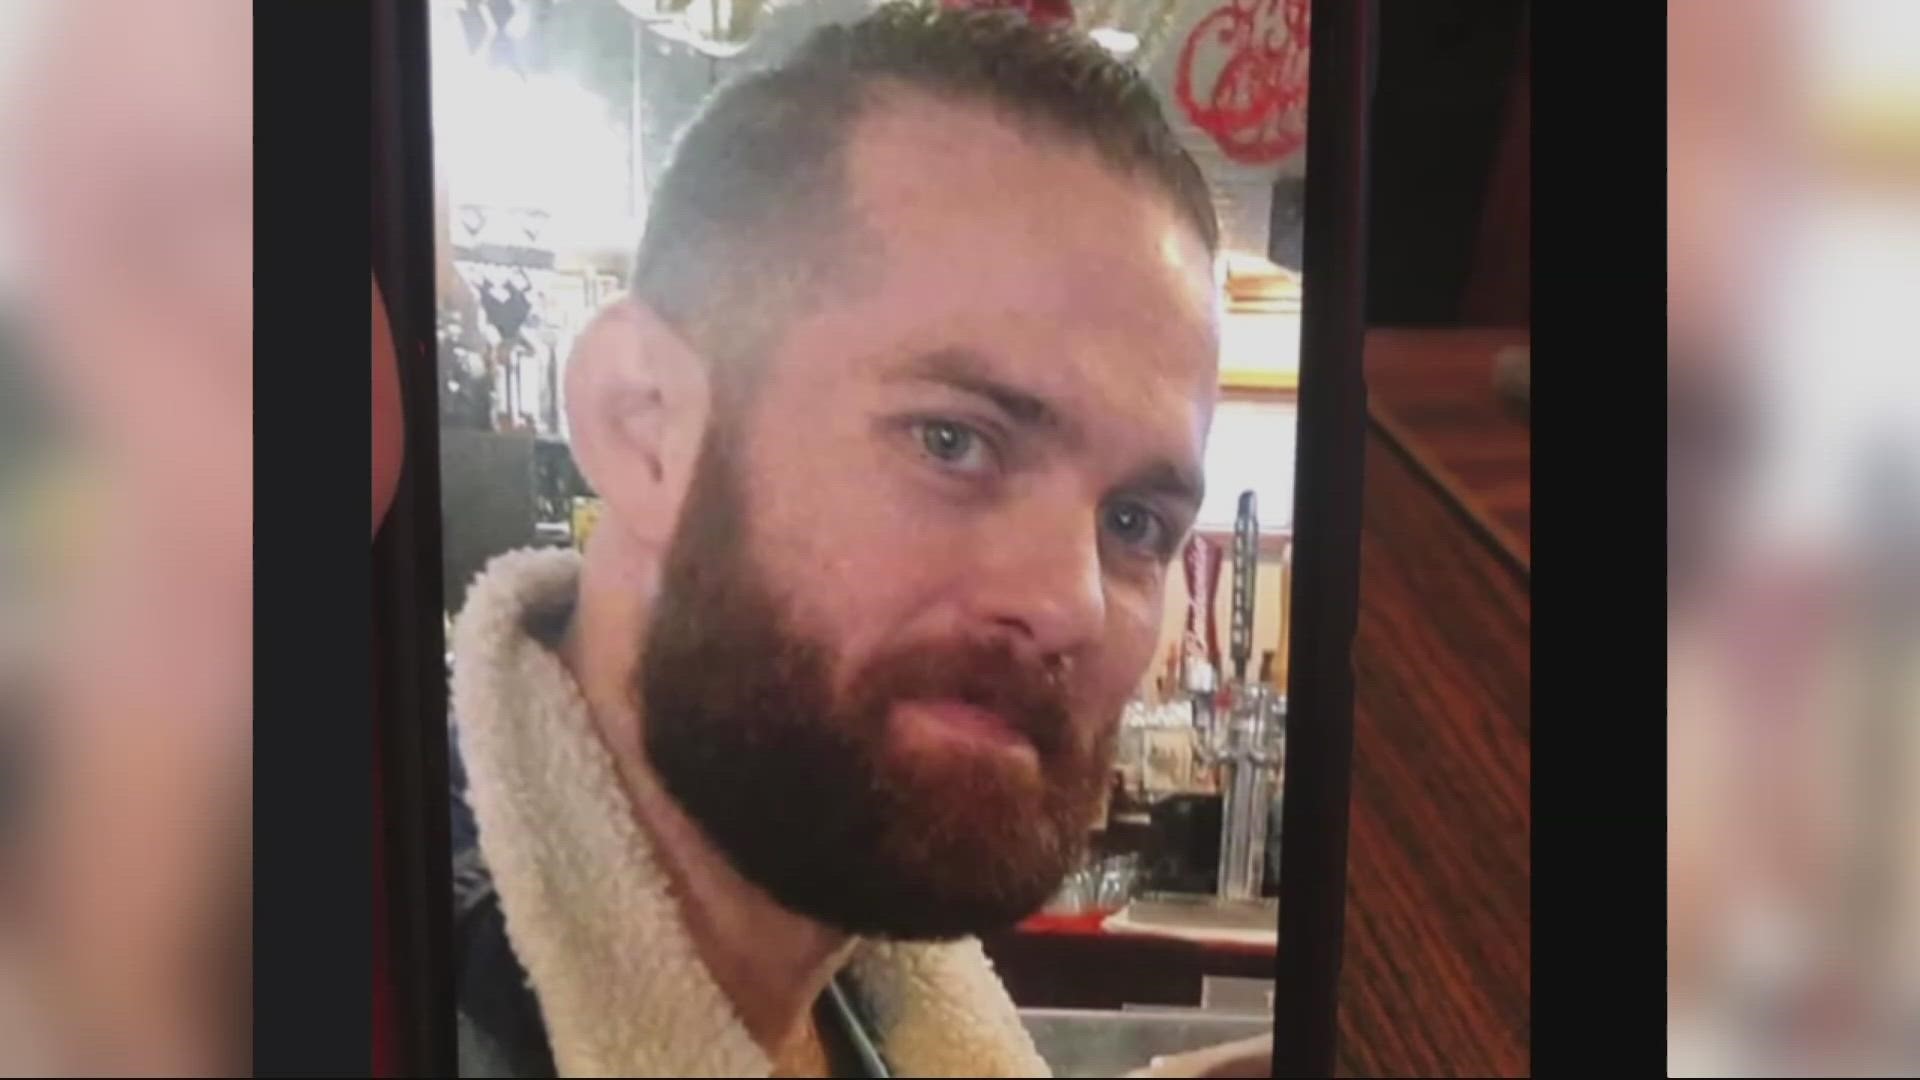 Benjamin Foster, 36, died on the way to the hospital after an hours long standoff with police in Grants Pass, according to our affiliate KEZI.